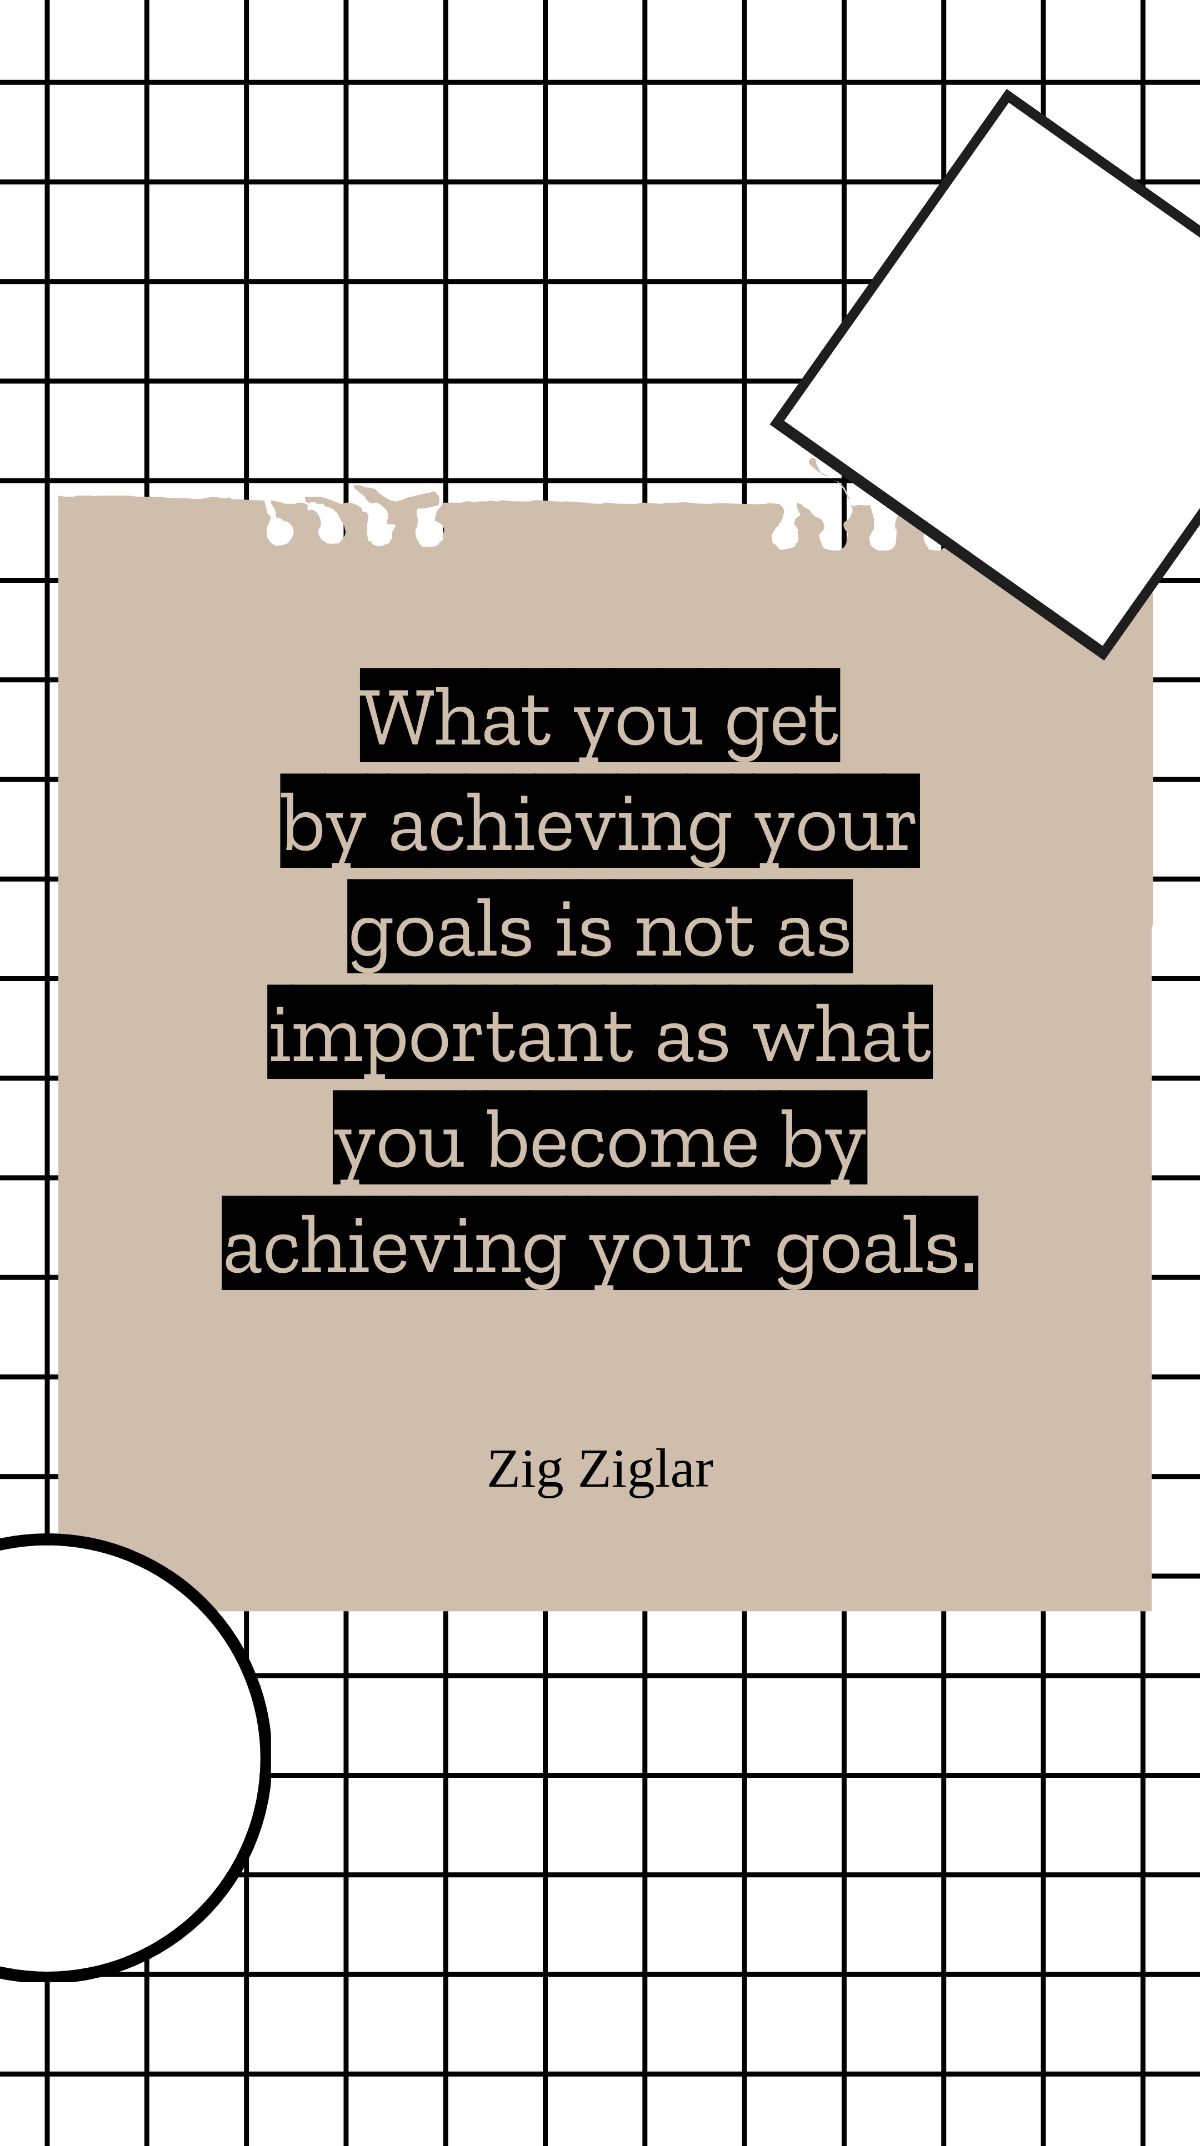 Zig Ziglar - What you get by achieving your goals is not as important as what you become by achieving your goals.